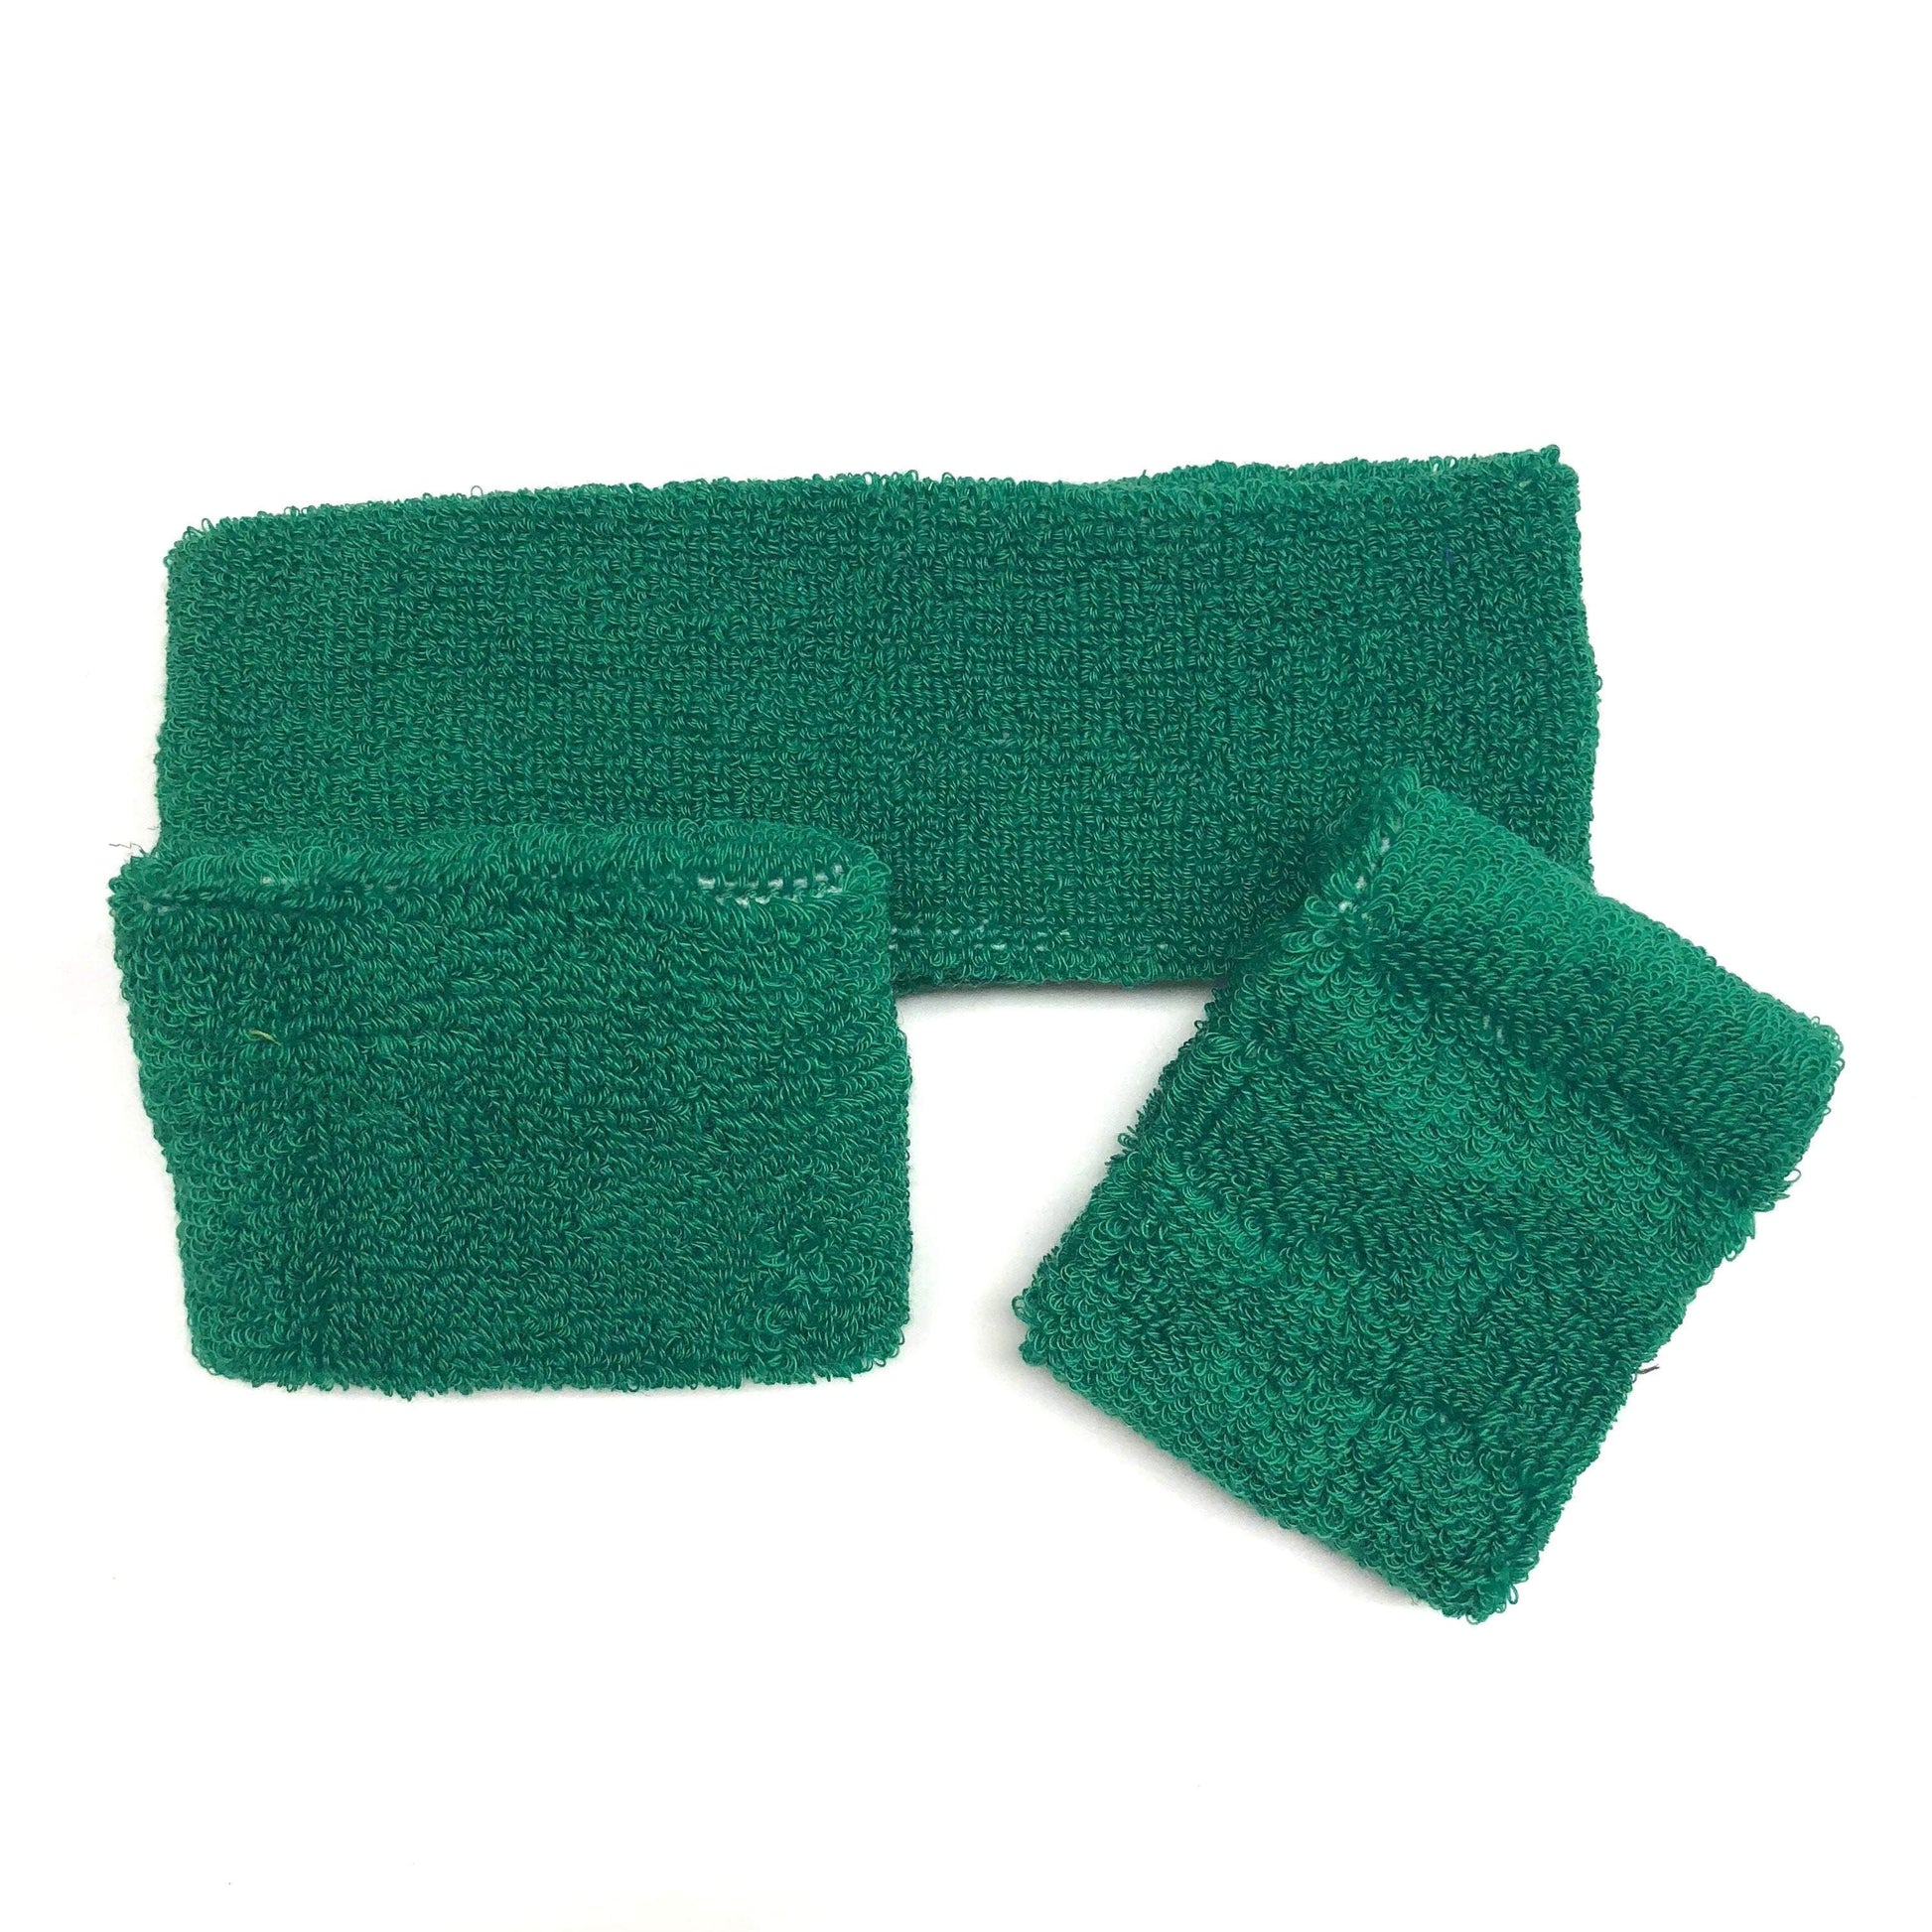 Green Sweat Band Set (3pc) - Ponytails and Fairytales